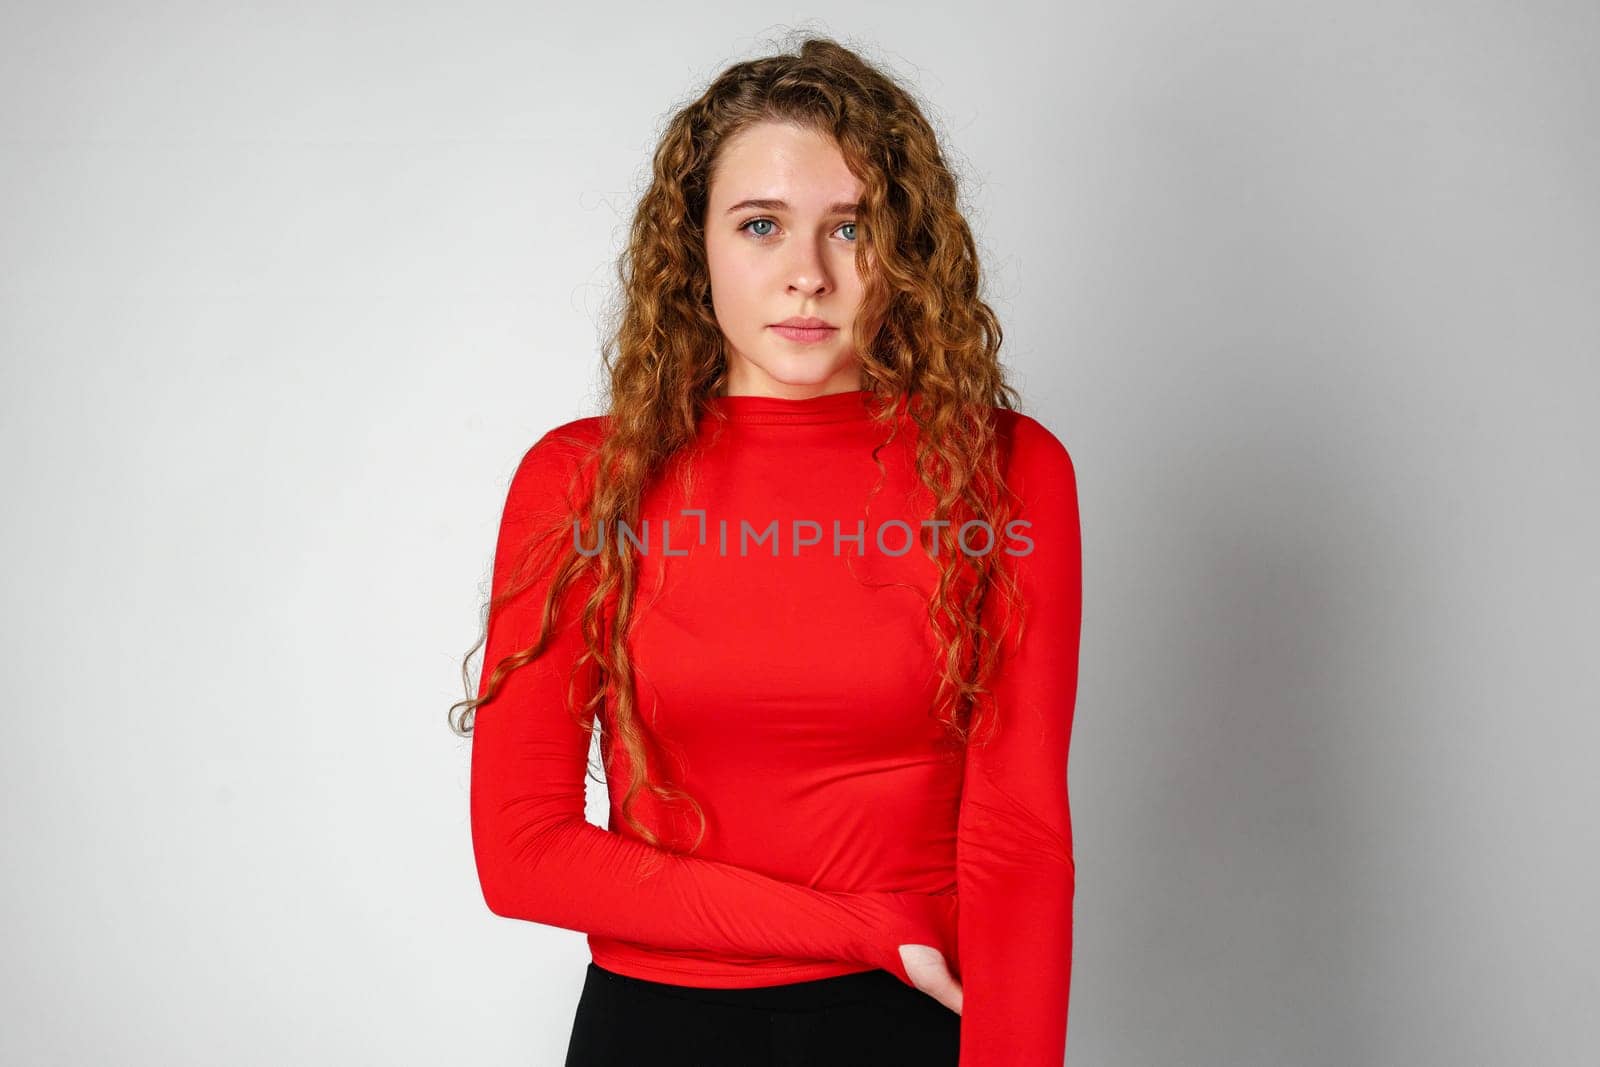 Woman With Curly Hair Standing on Gray Background by Fabrikasimf